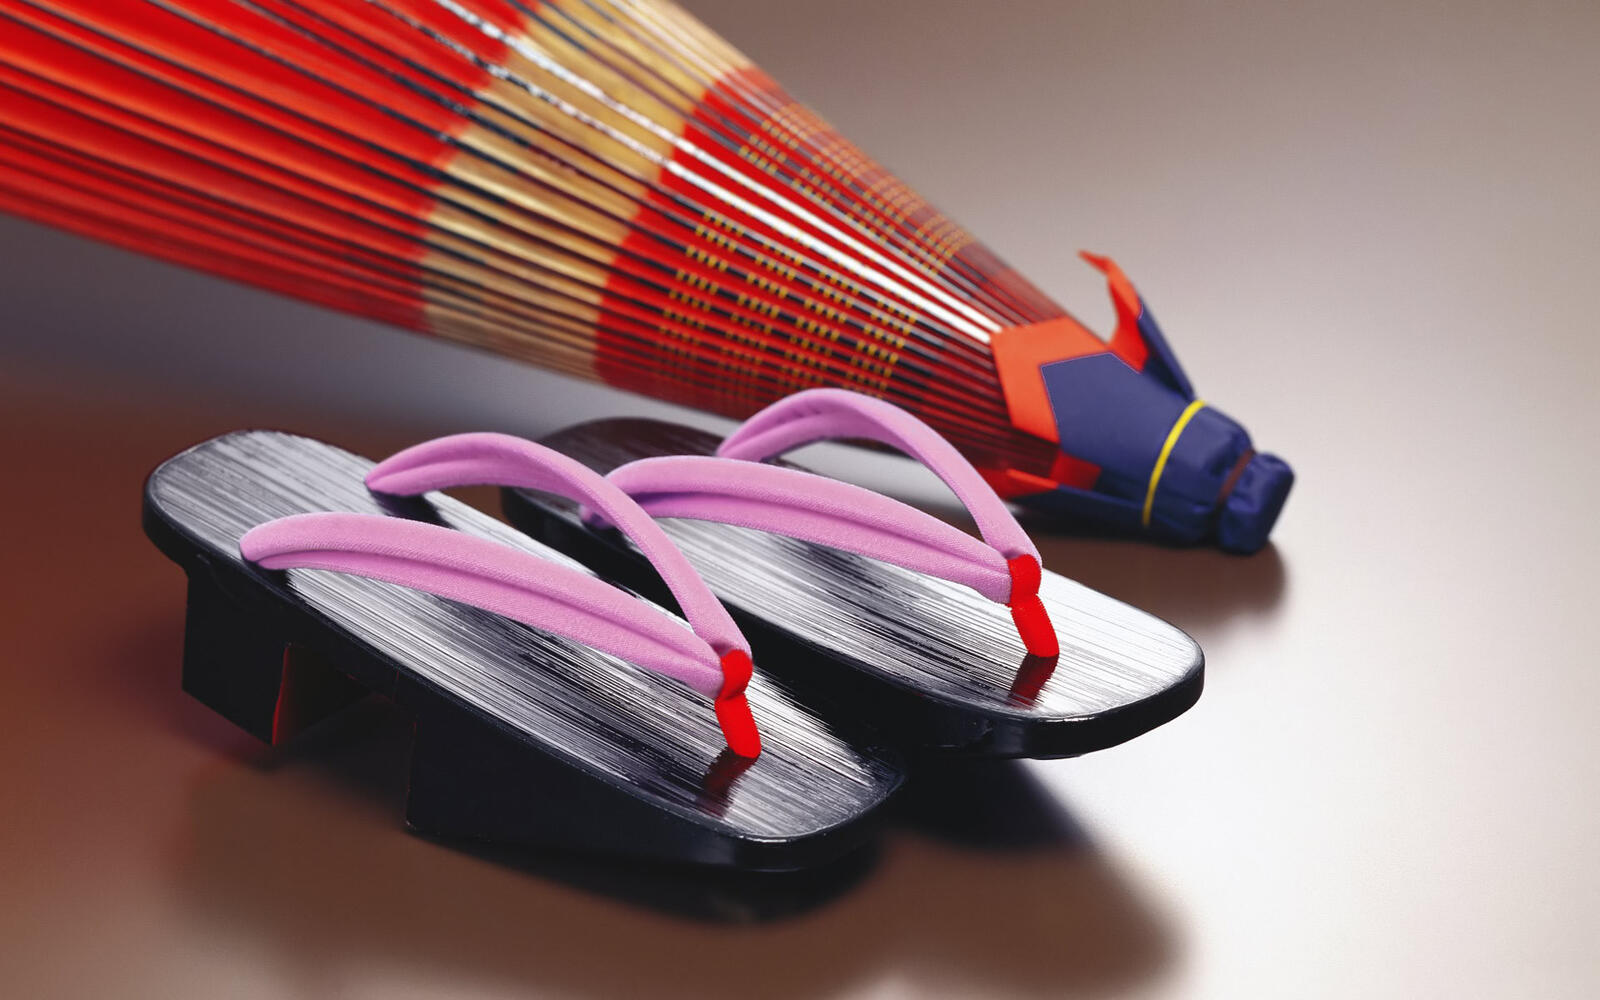 Wallpapers slippers Japanese culture on the desktop